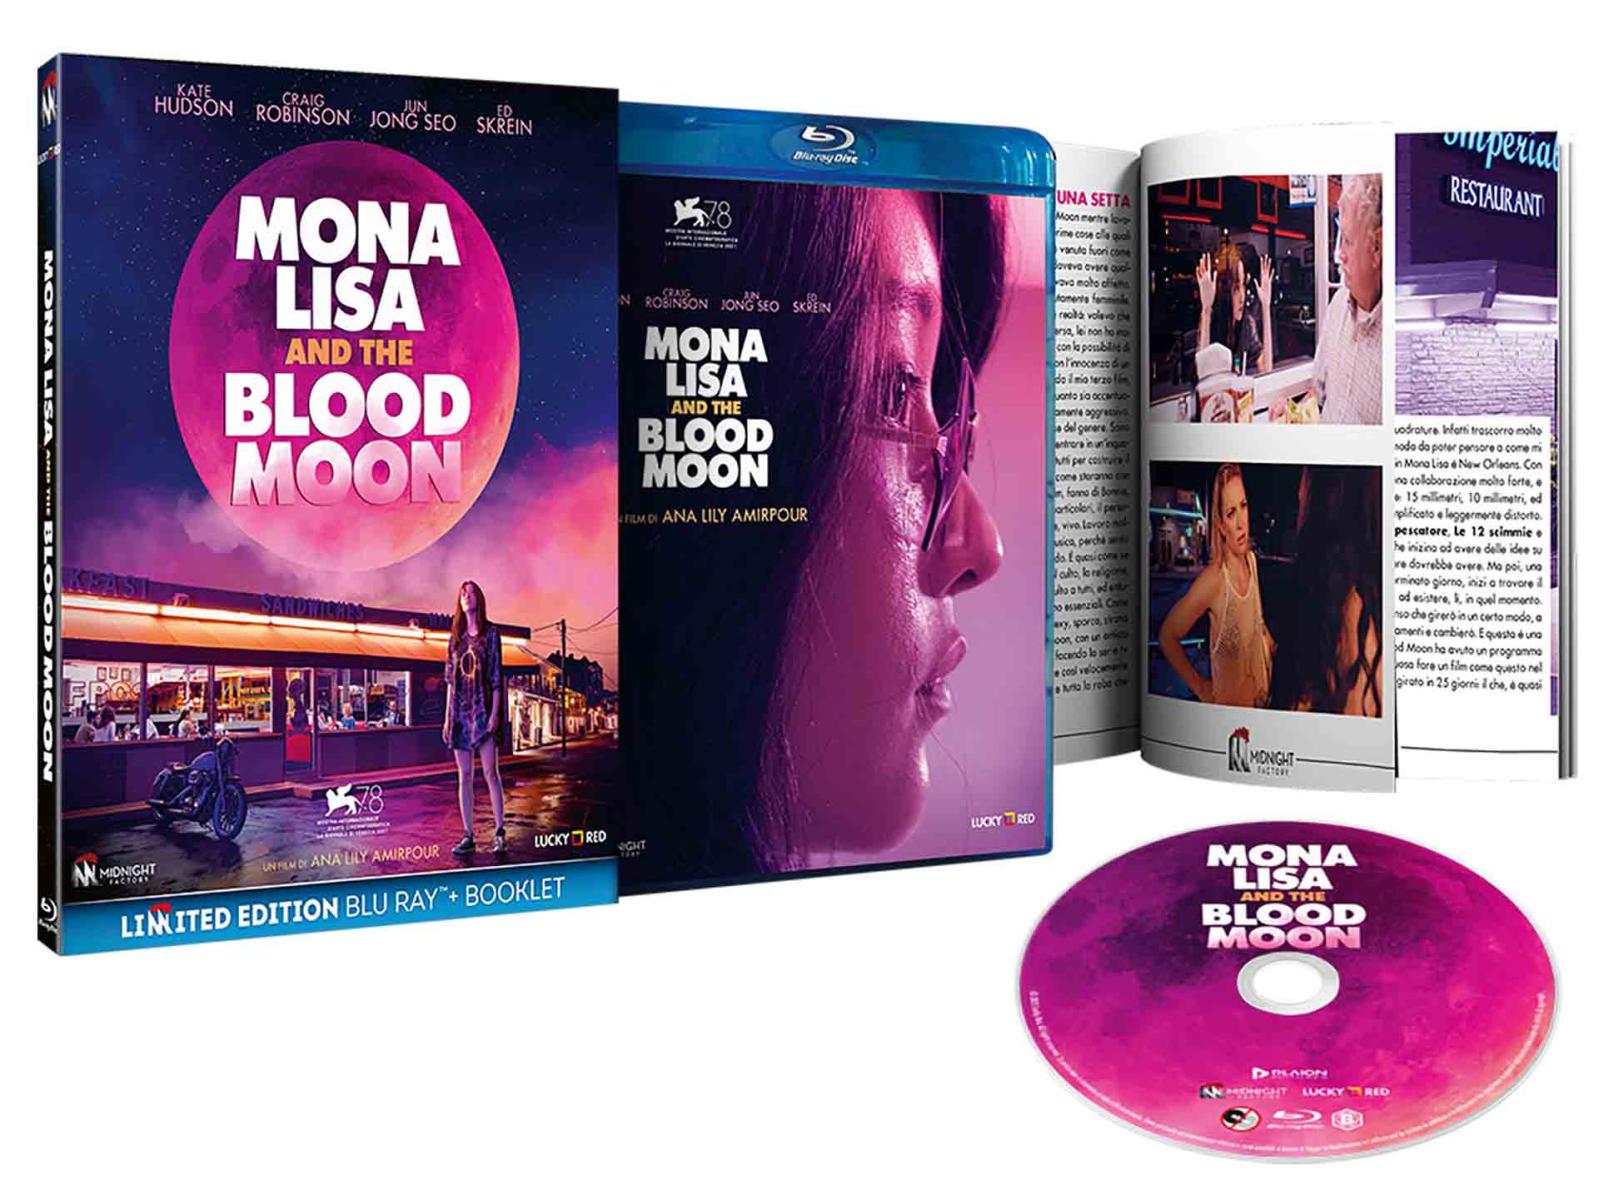 Mona Lisa and the Blood Moon - Limited Edition Blu-ray + Booklet (Blu-ray) Image 7